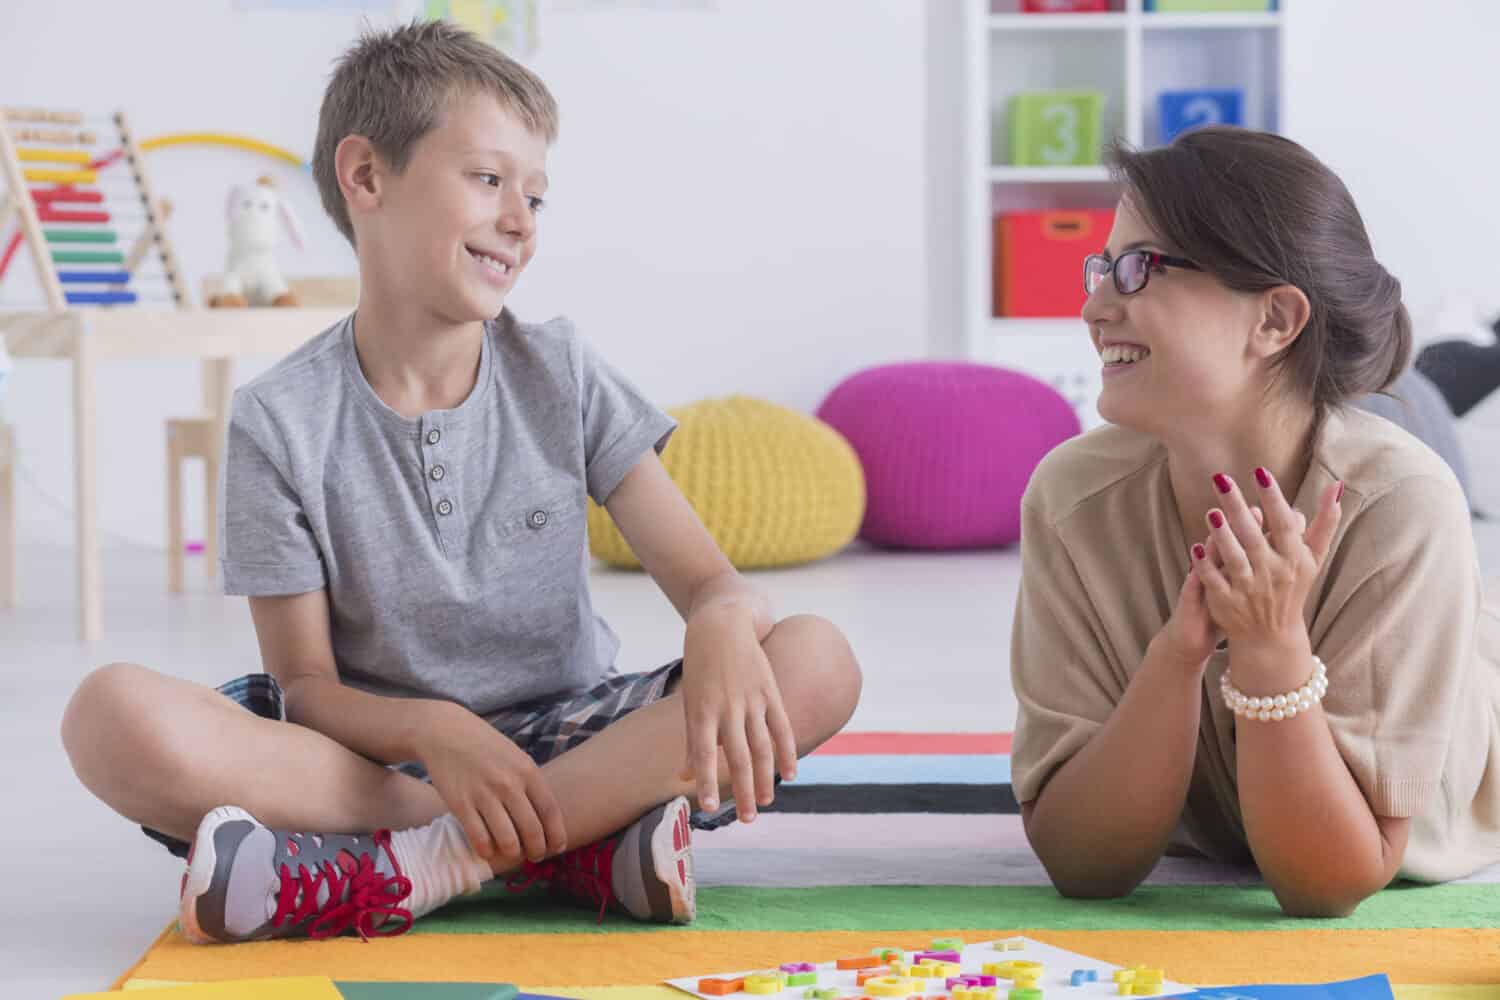 Happy little child during during therapy with school counselor, learning and having fun together sitting on the floor in a colorful playroom